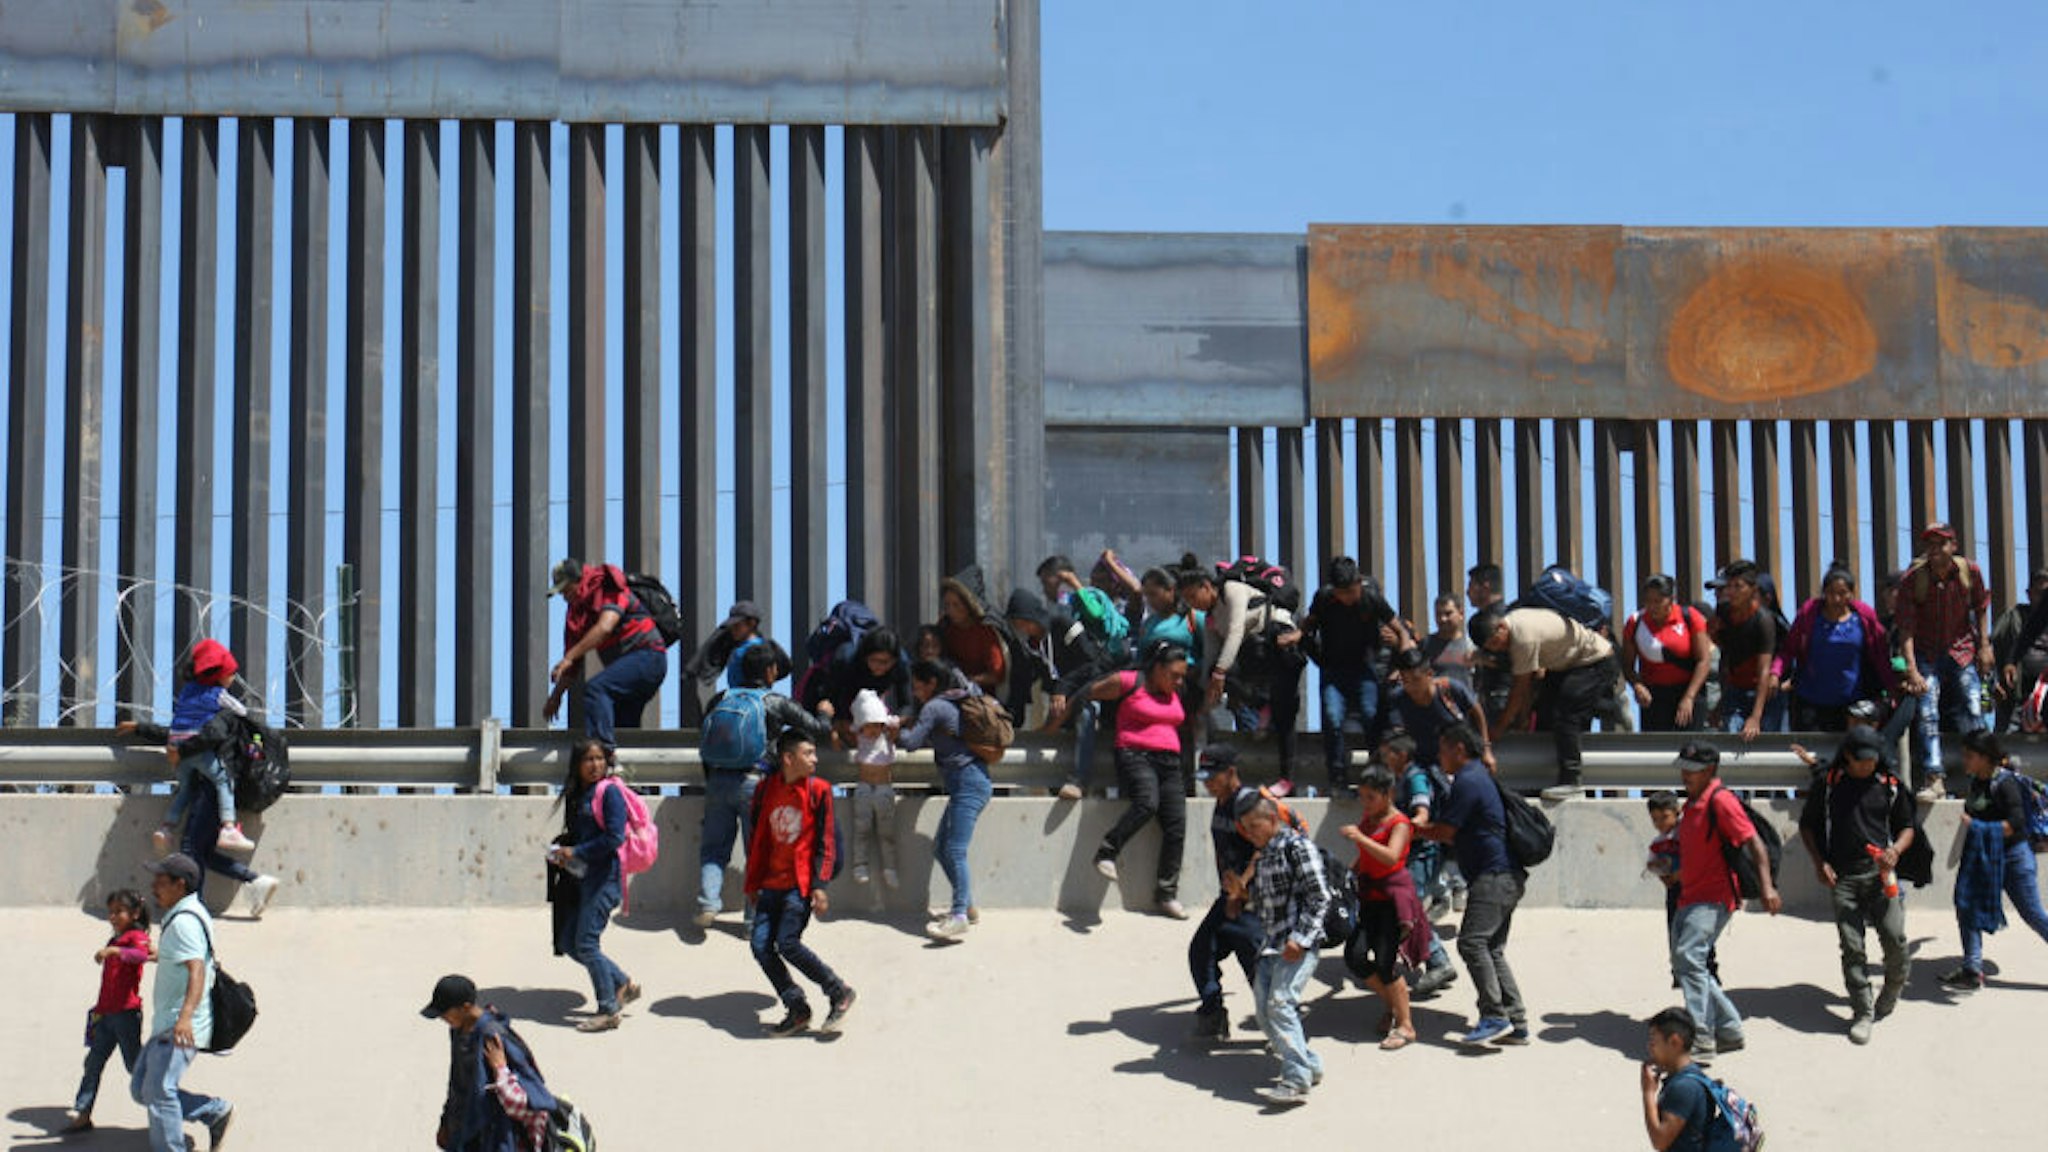 500 Central American migrants entered the United States illegally under the international bridge Santa Fe in Ciudad Juarez Chihuahua border with Texas is the largest group that was able to intern the United States in this exodus of Central Americans on 9 May 2019.